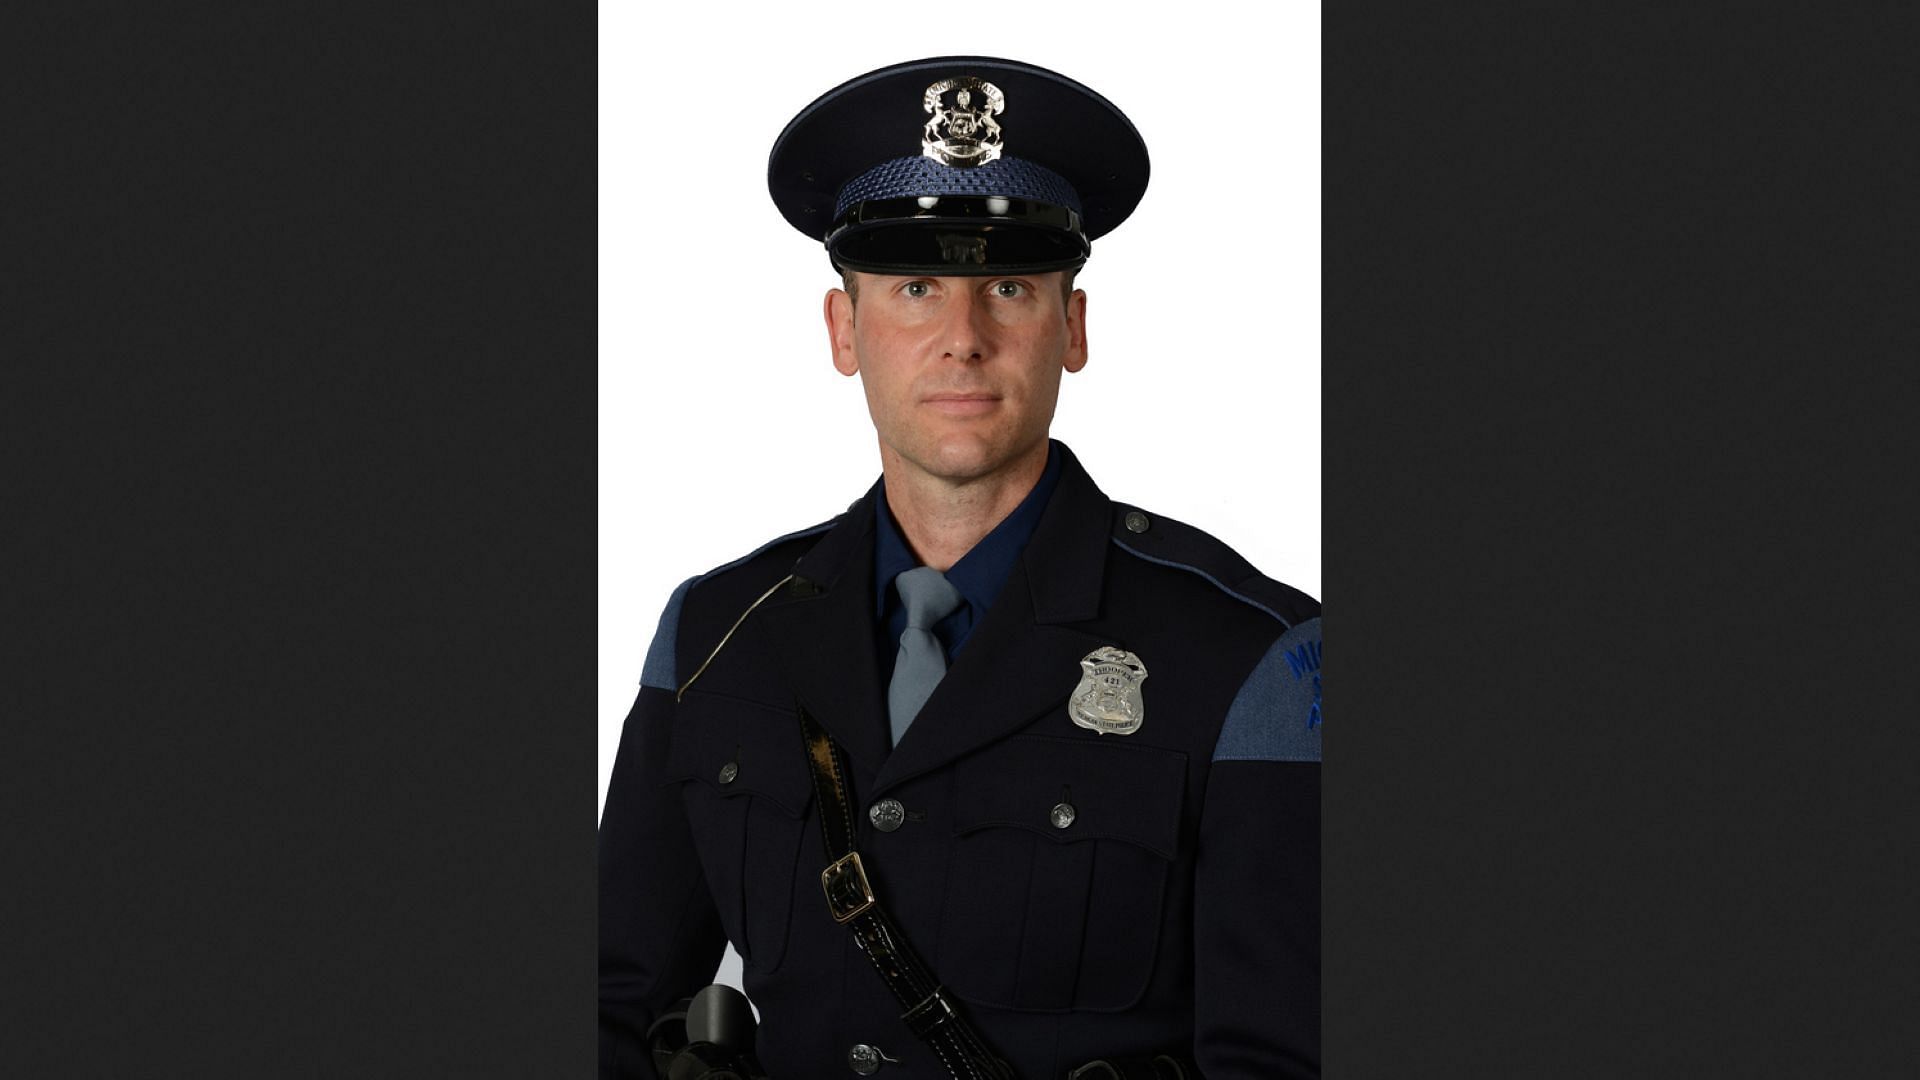 Joel Popp GoFundMe raises over $30,100 as Michigan State Trooper dies in Traffic Stop accident. (Image via Michigan State Police)